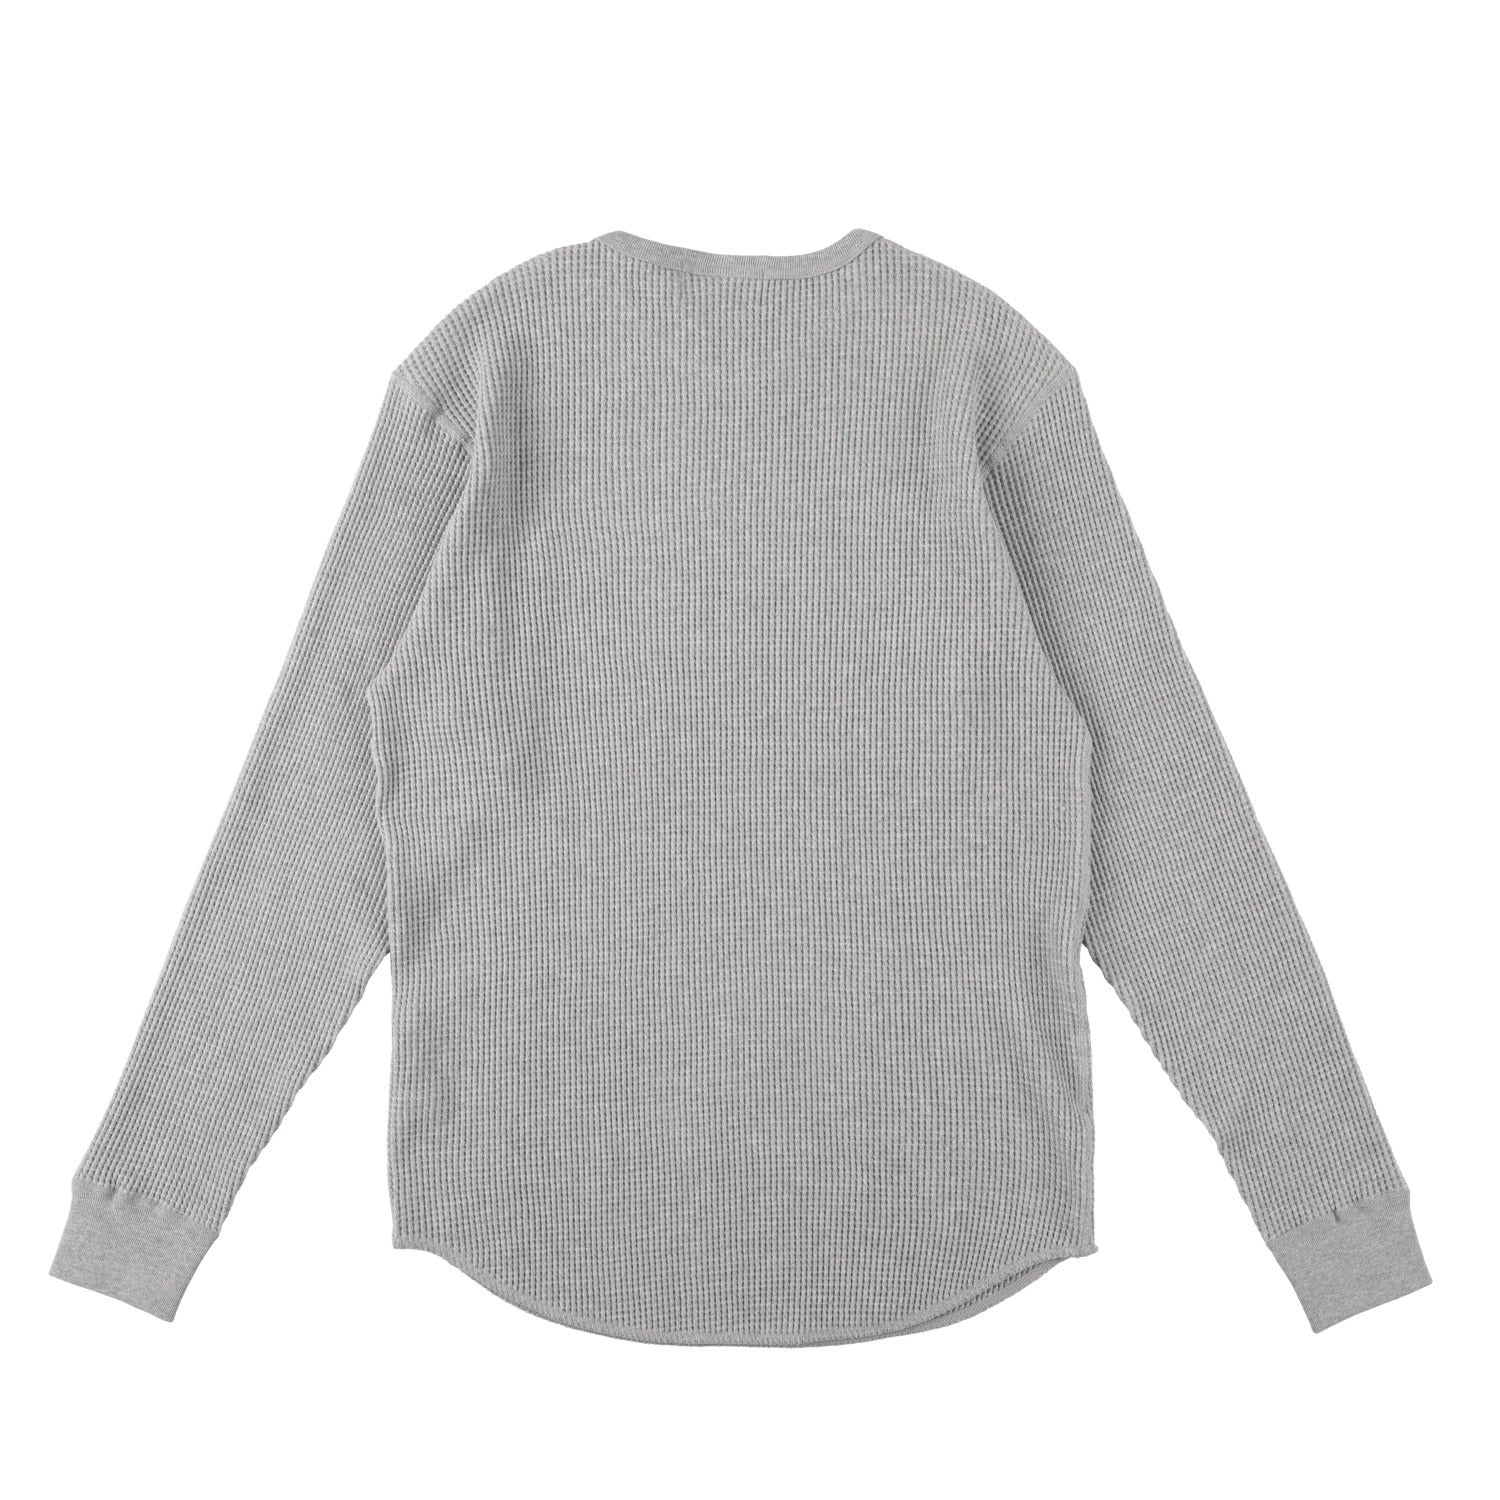 RIDEZ CO.THERMAL L/S TEE 10.3oz Thermal Long T RD7015